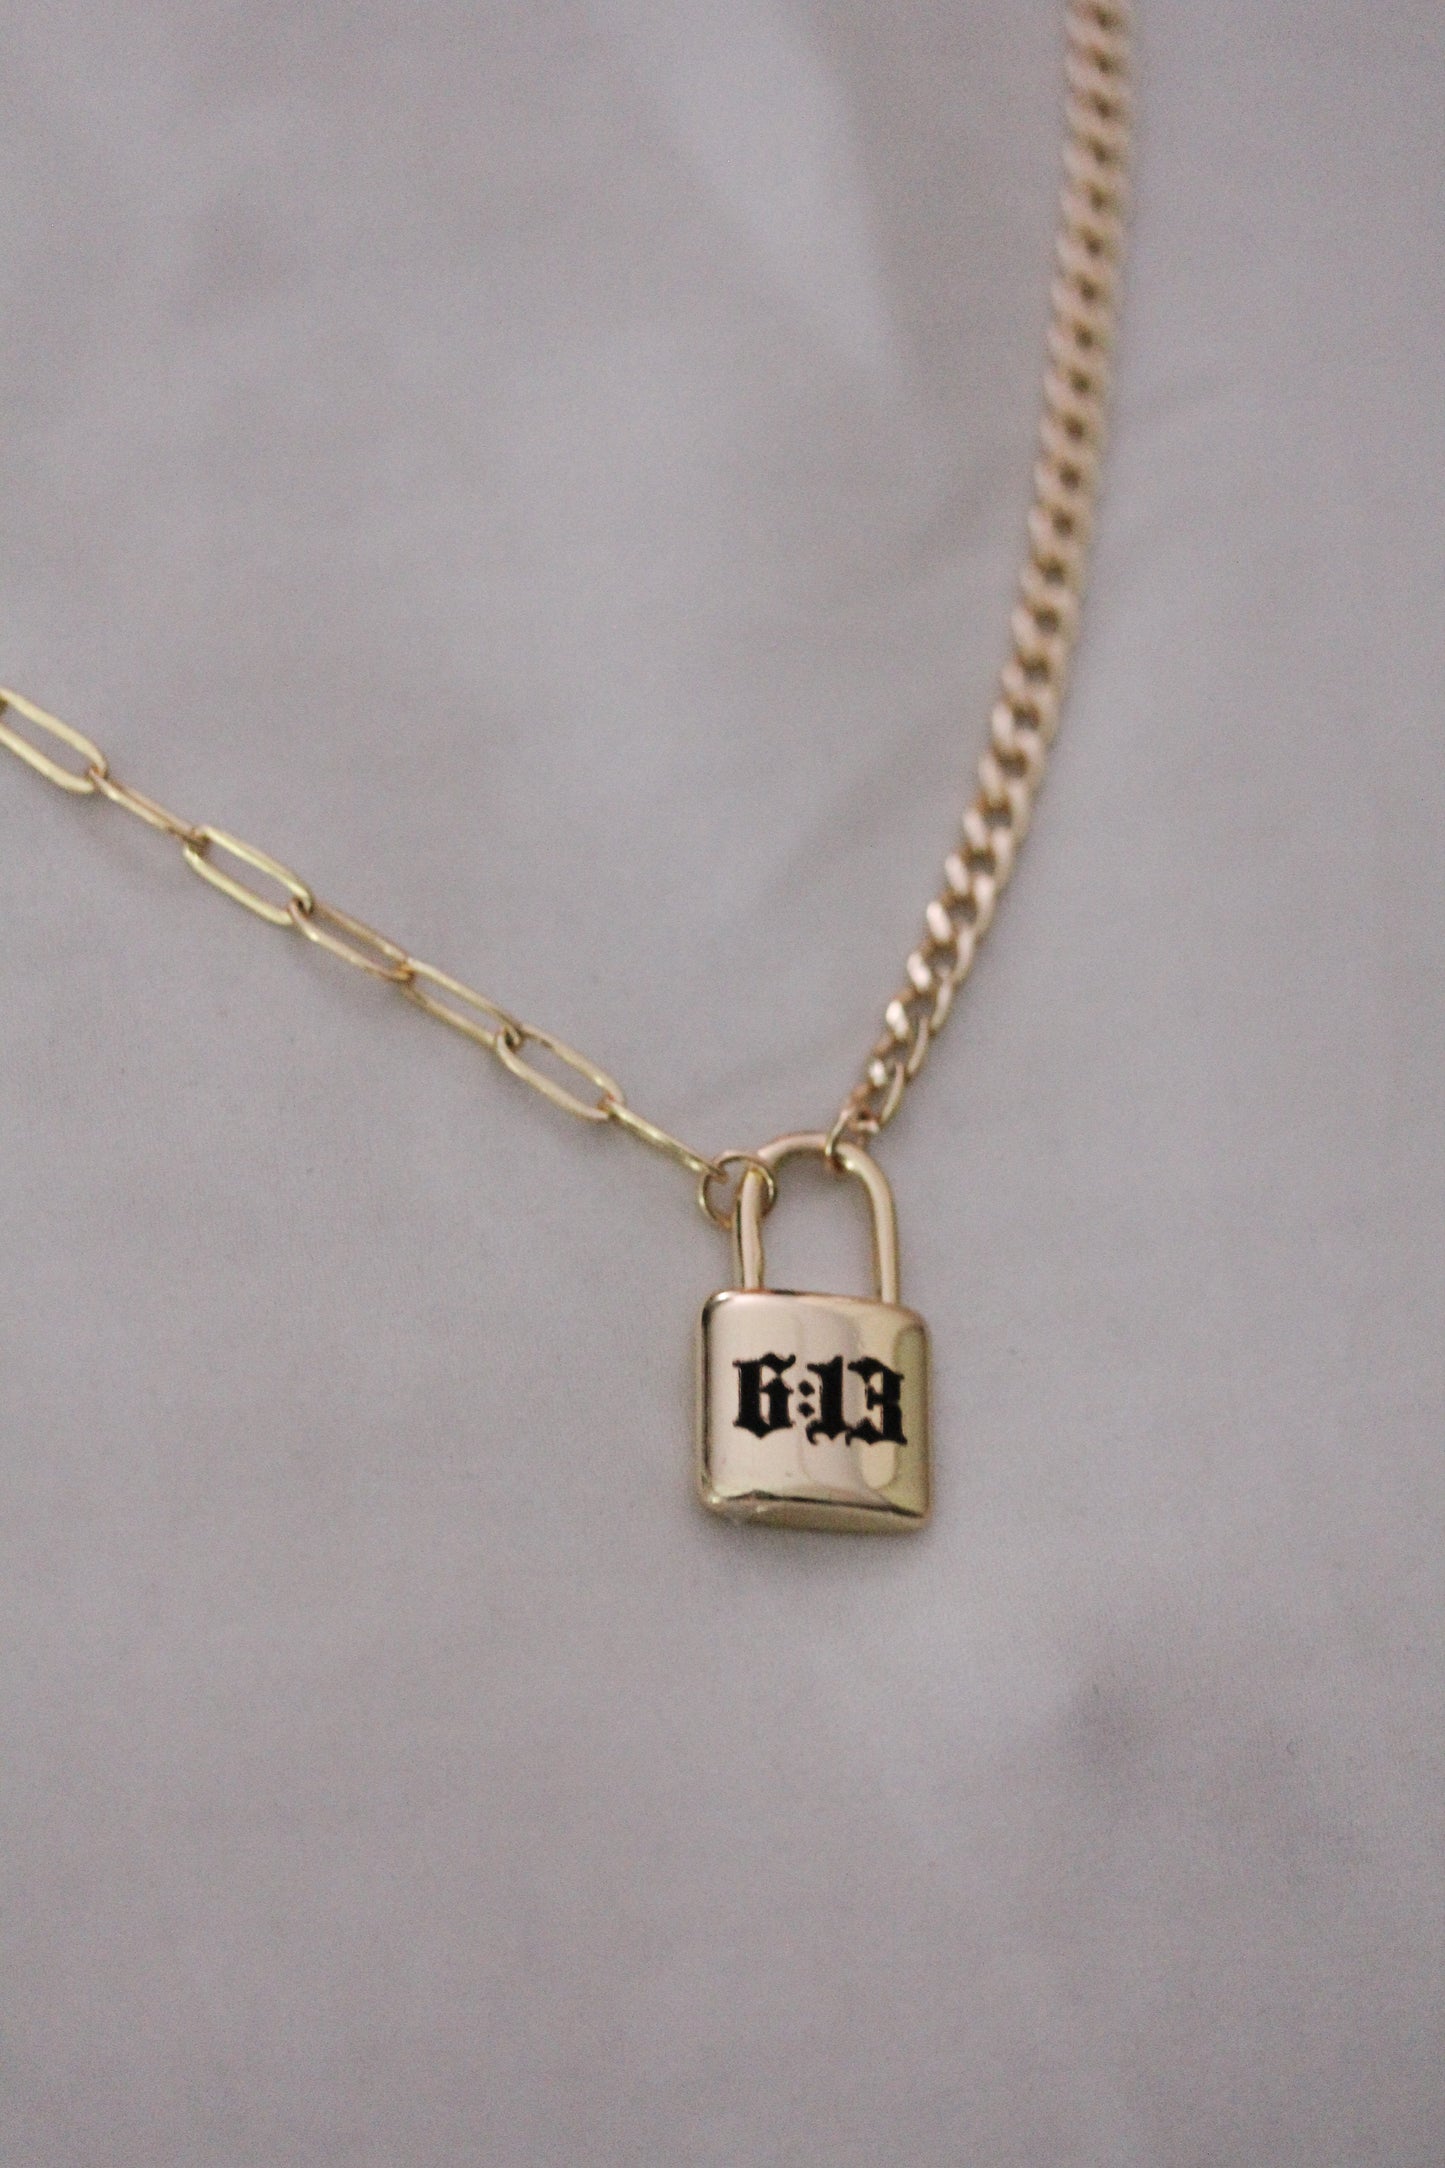 6:13 Necklace